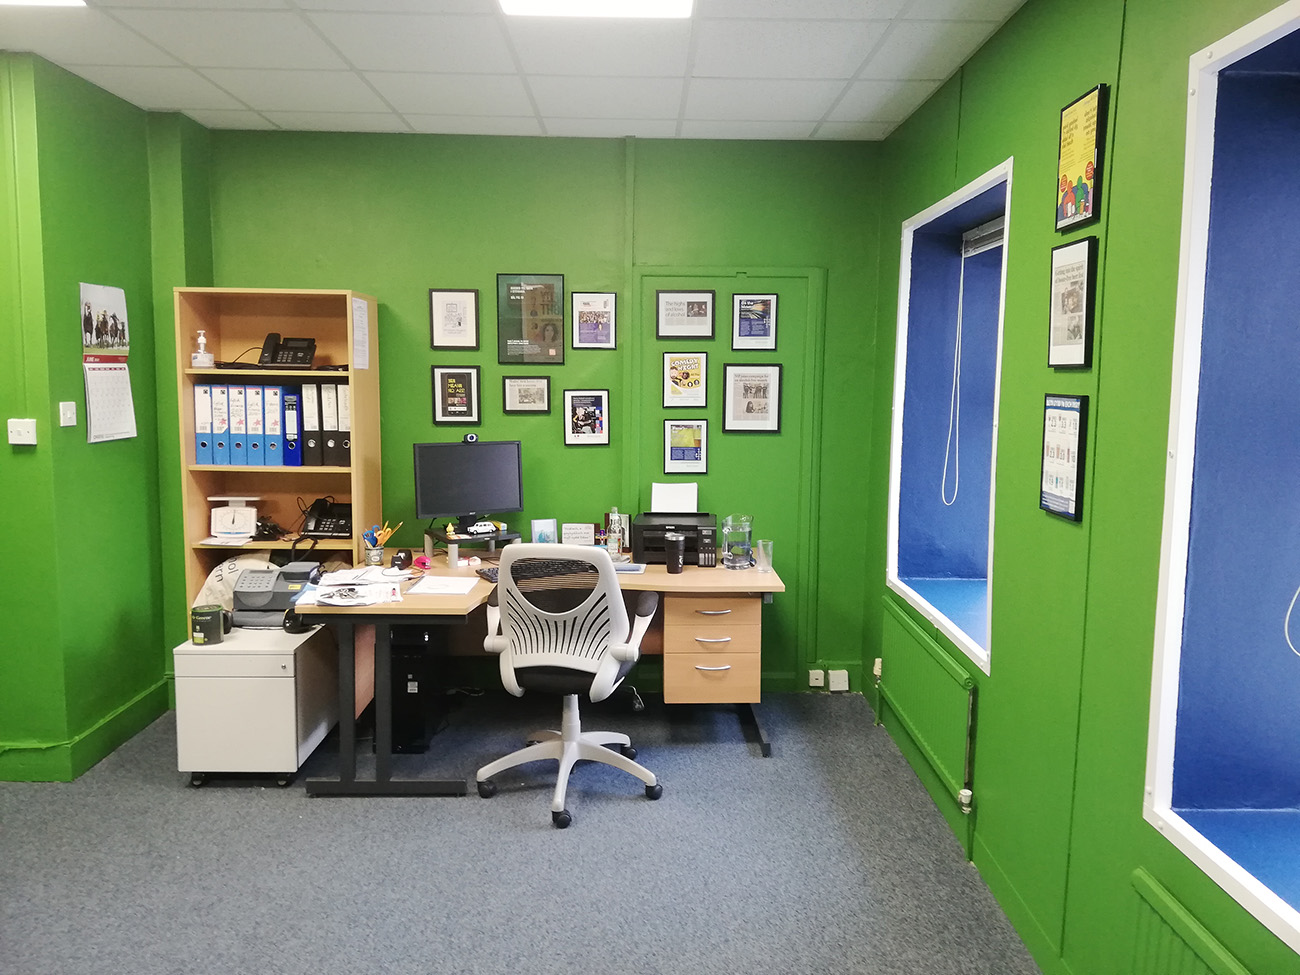 A photo of the finished office showing the green walls and blue frames around the windows.